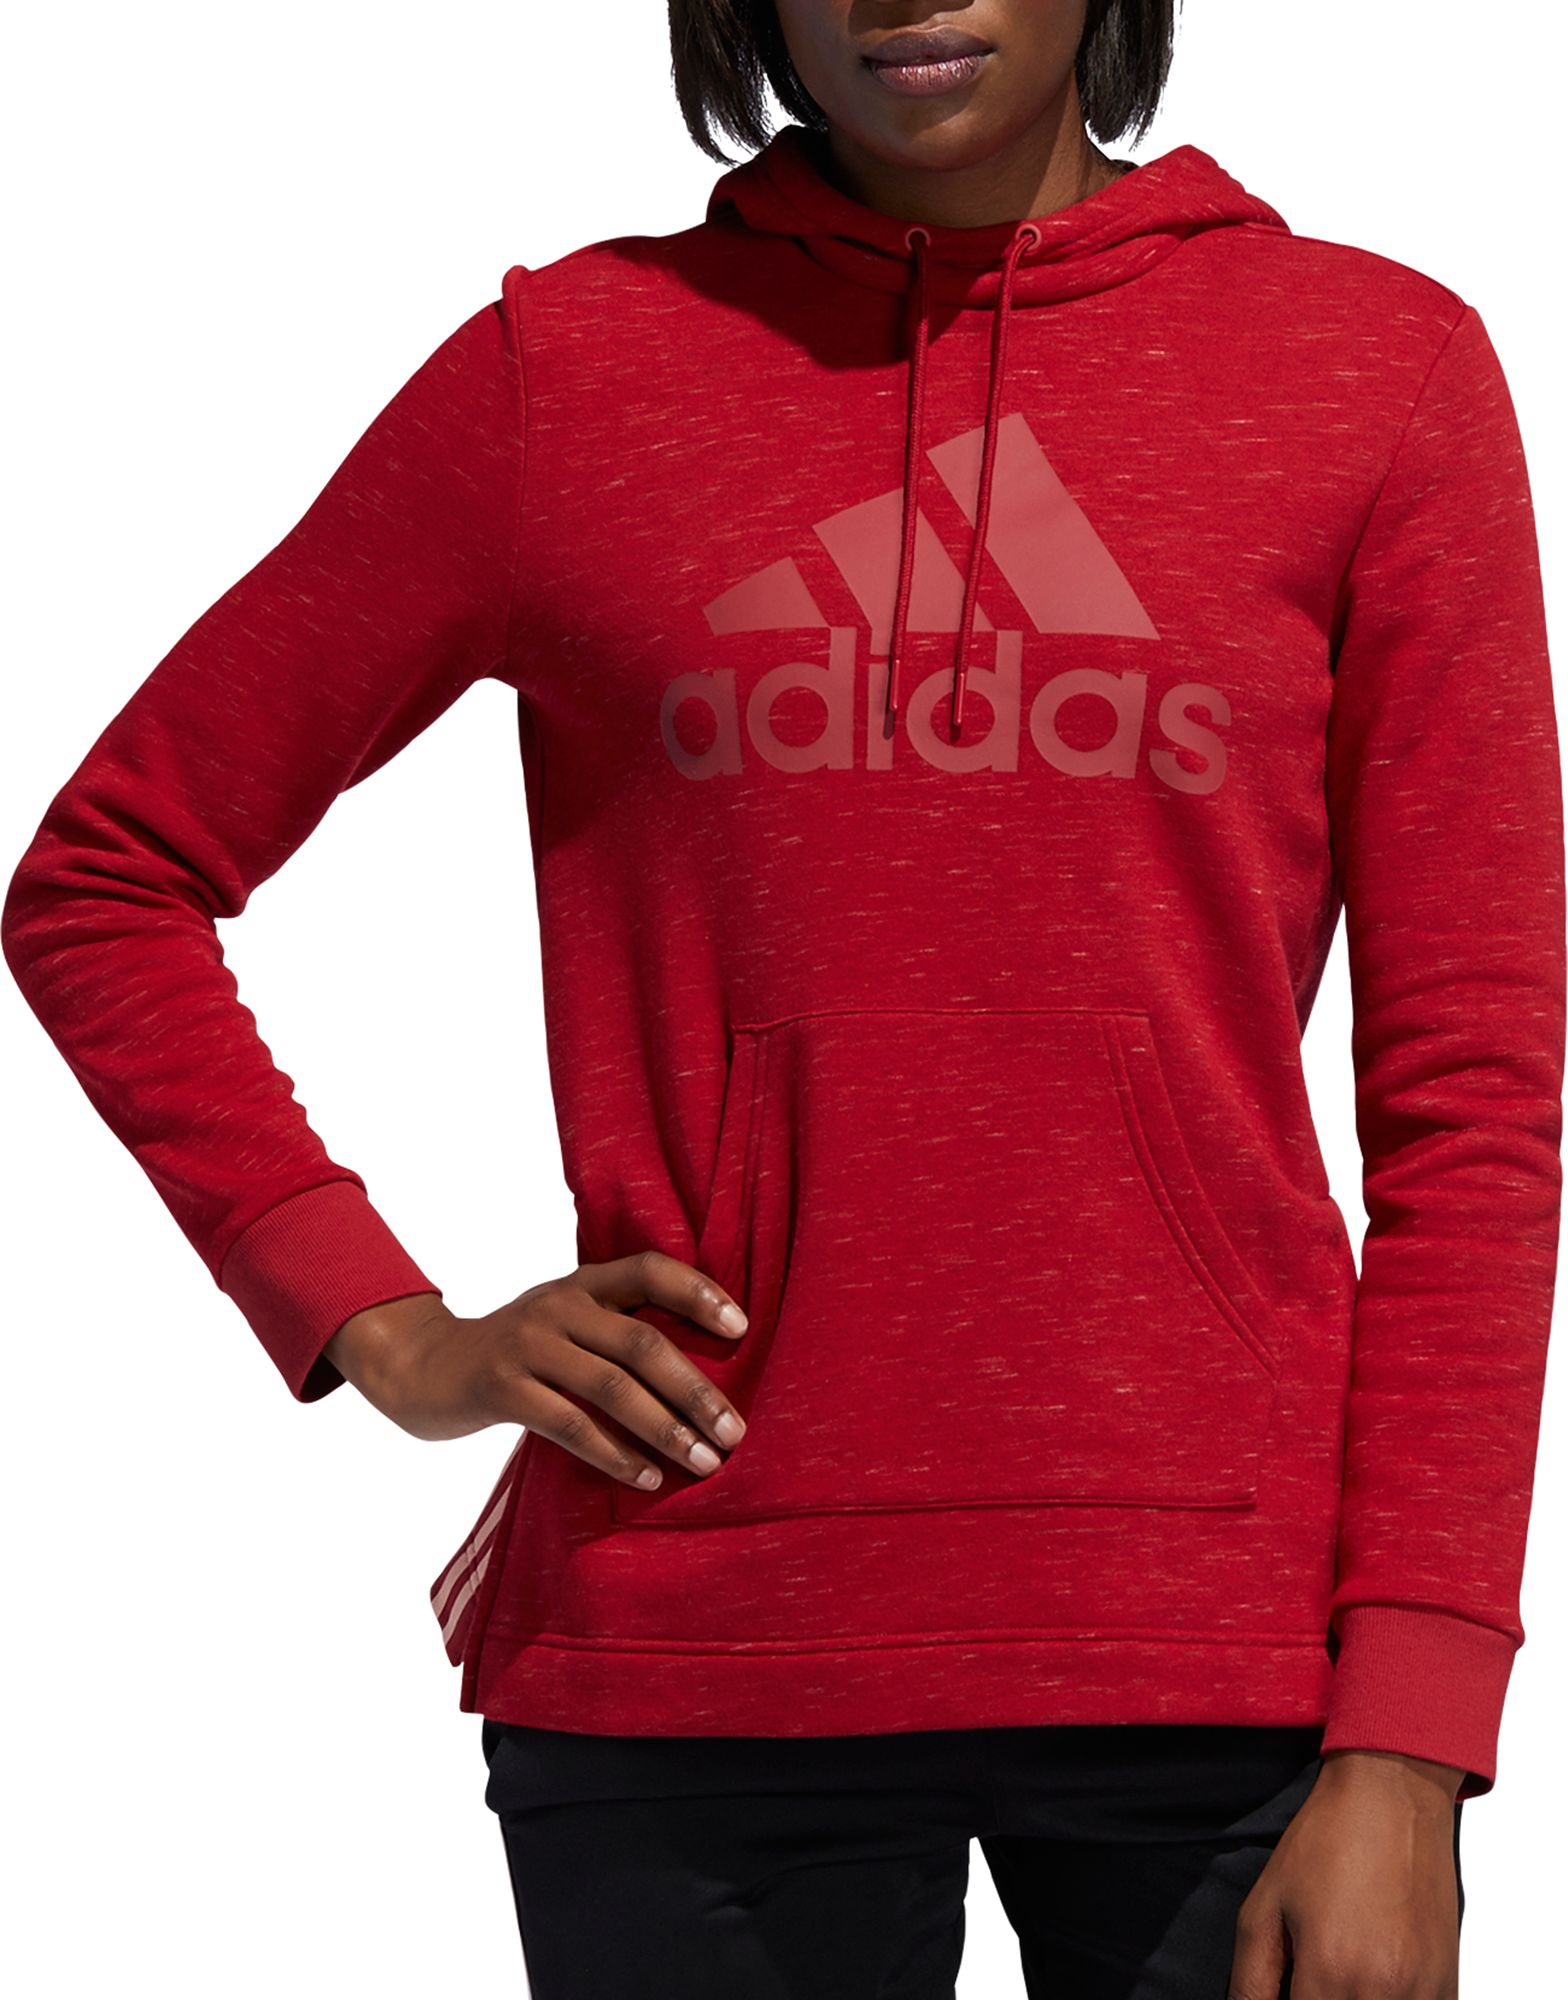 red adidas sweater womens